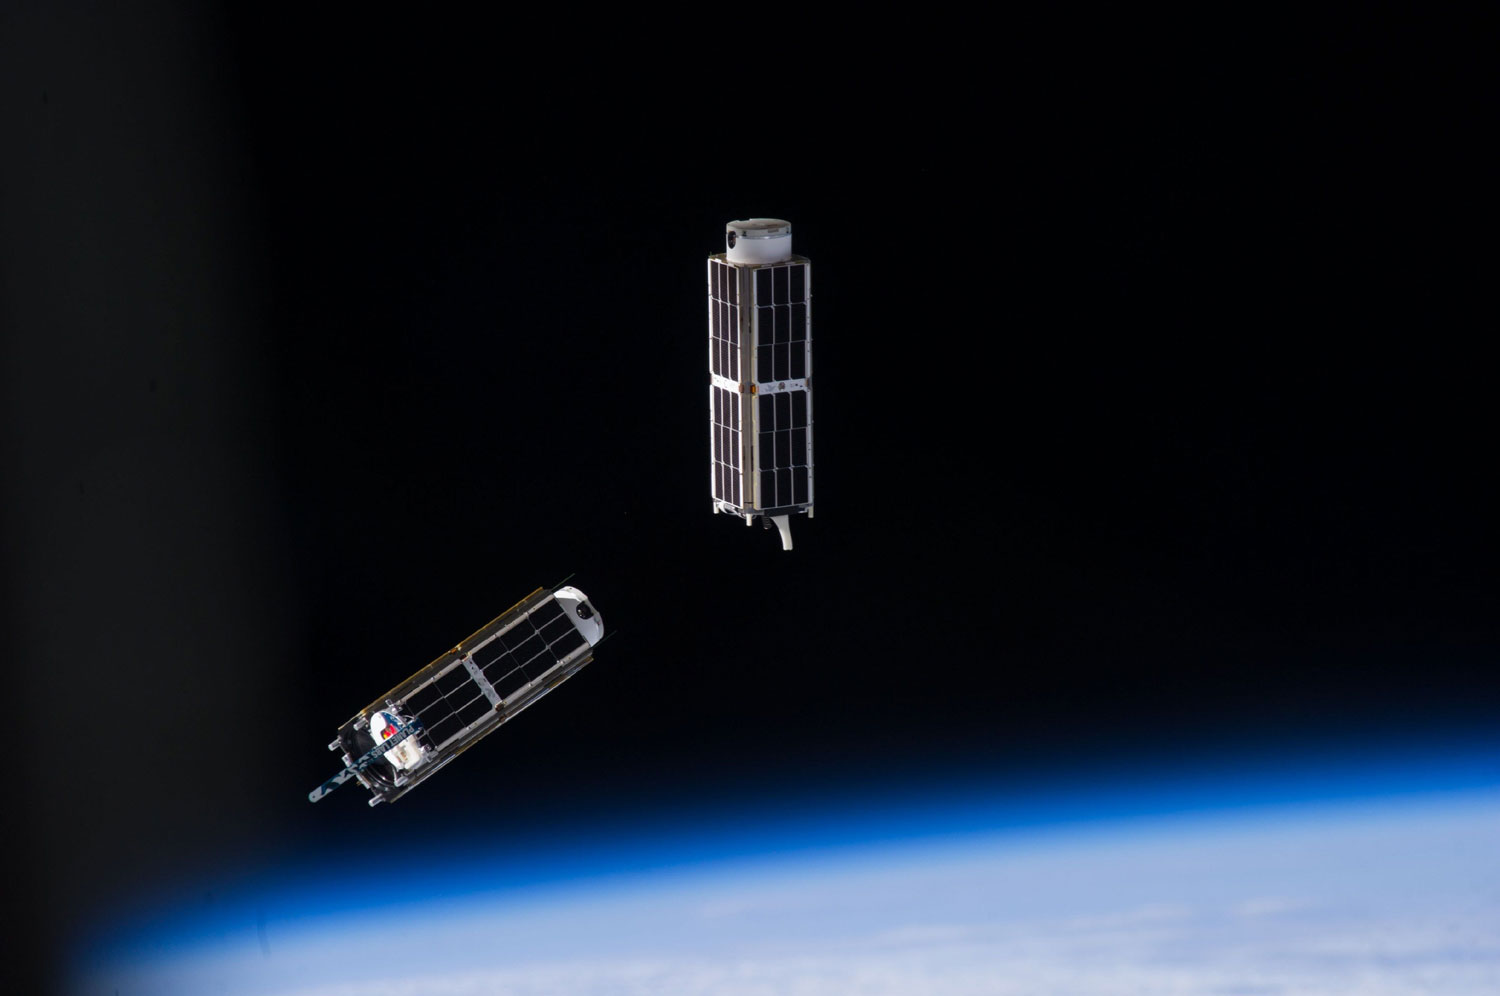 A set of NanoRacks CubeSats float in space after the deployment by the International Space Station on Feb. 13, 2014.